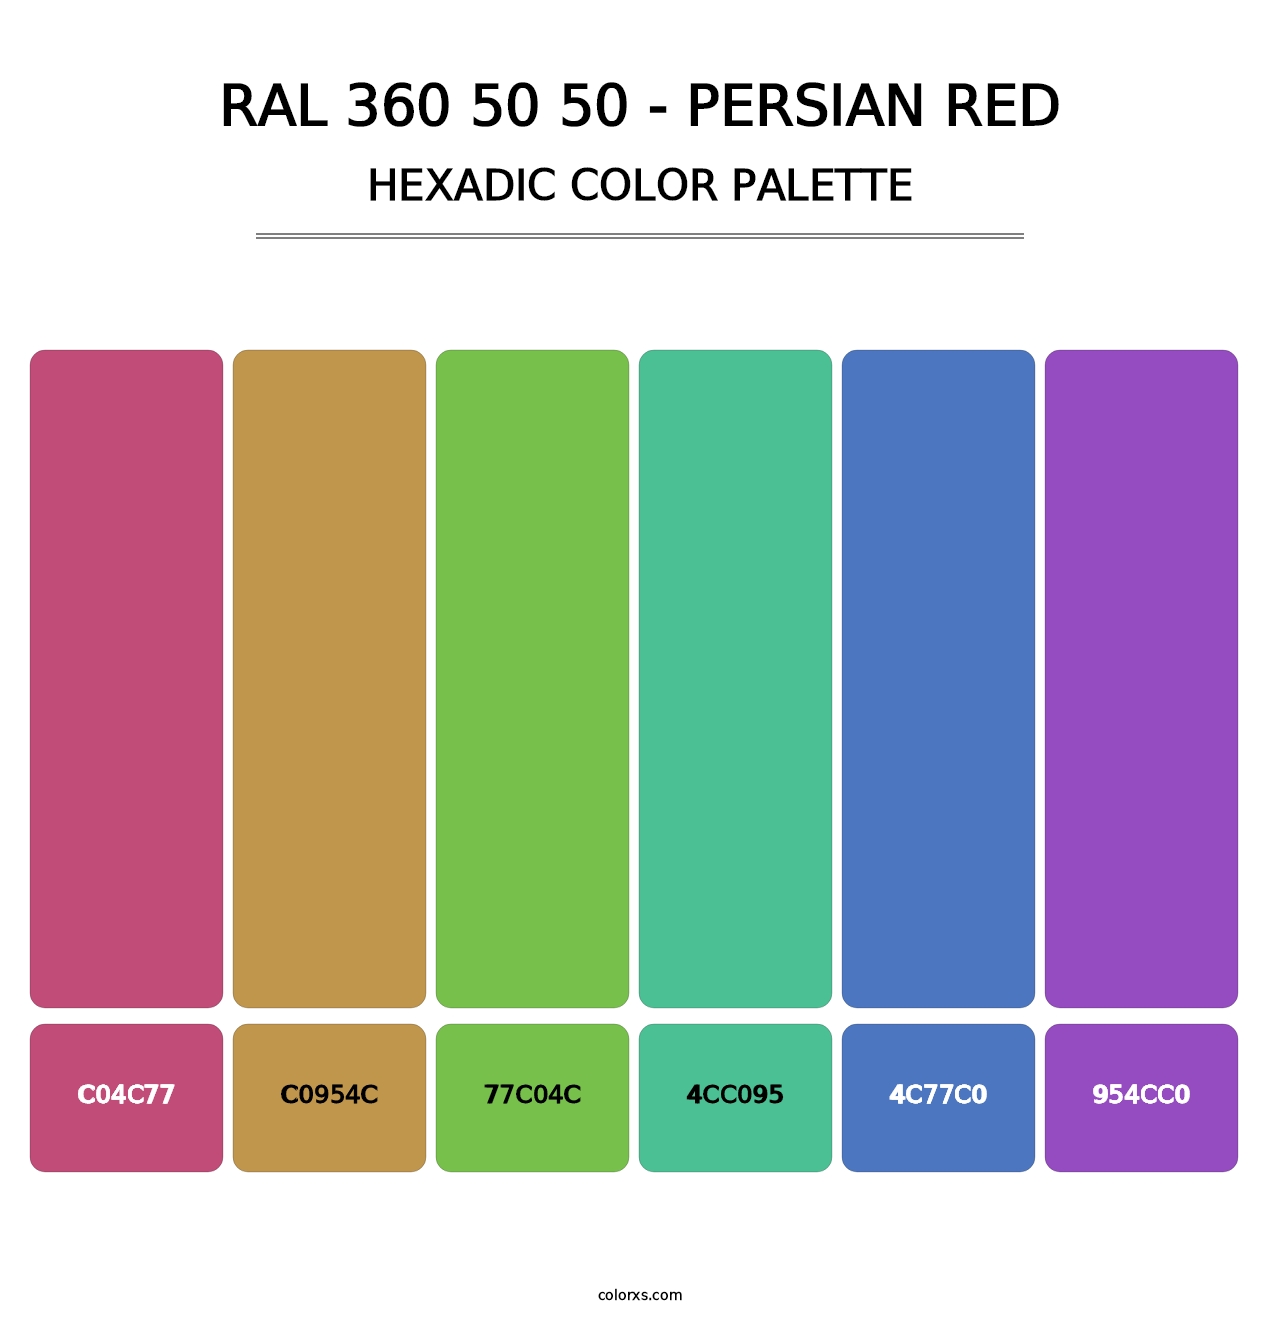 RAL 360 50 50 - Persian Red - Hexadic Color Palette